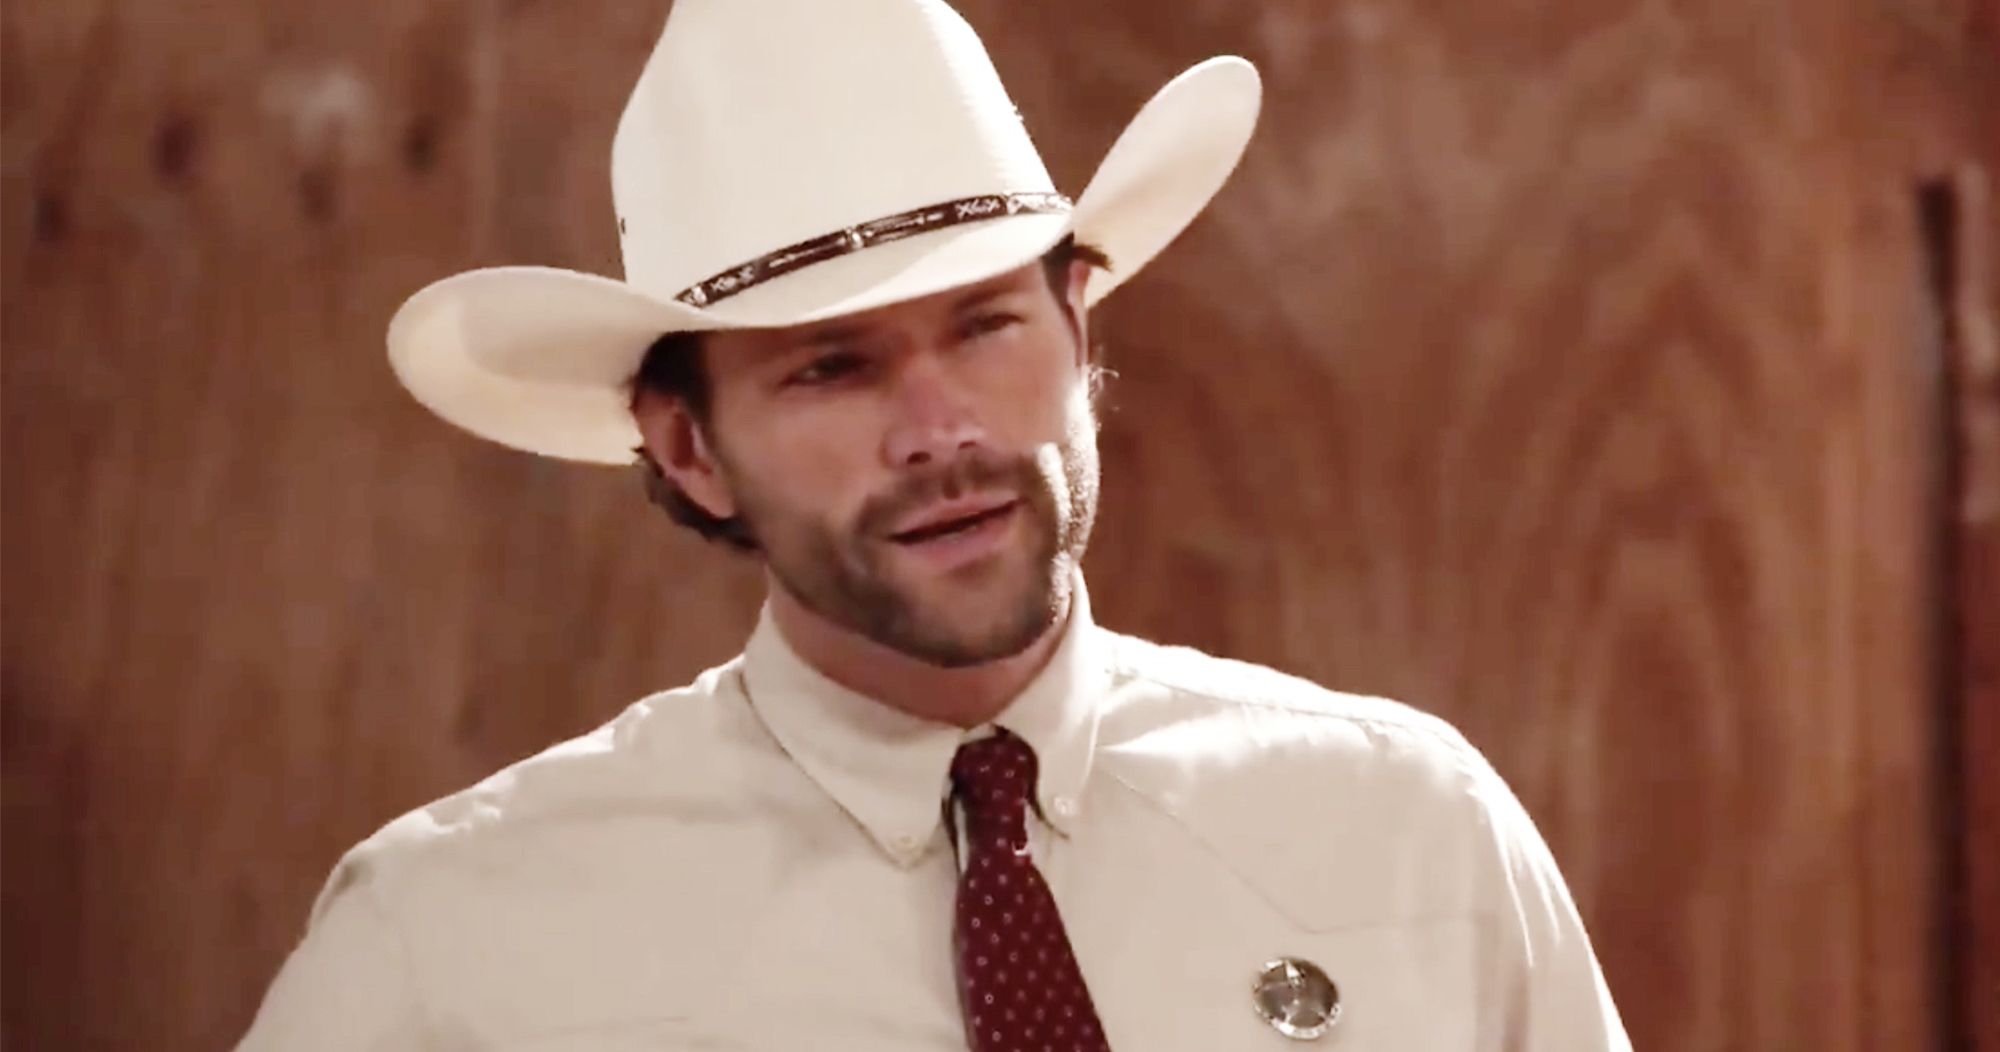 Walker Trailer Reveals First Look at Jared Padalecki as the Iconic Texas Ranger